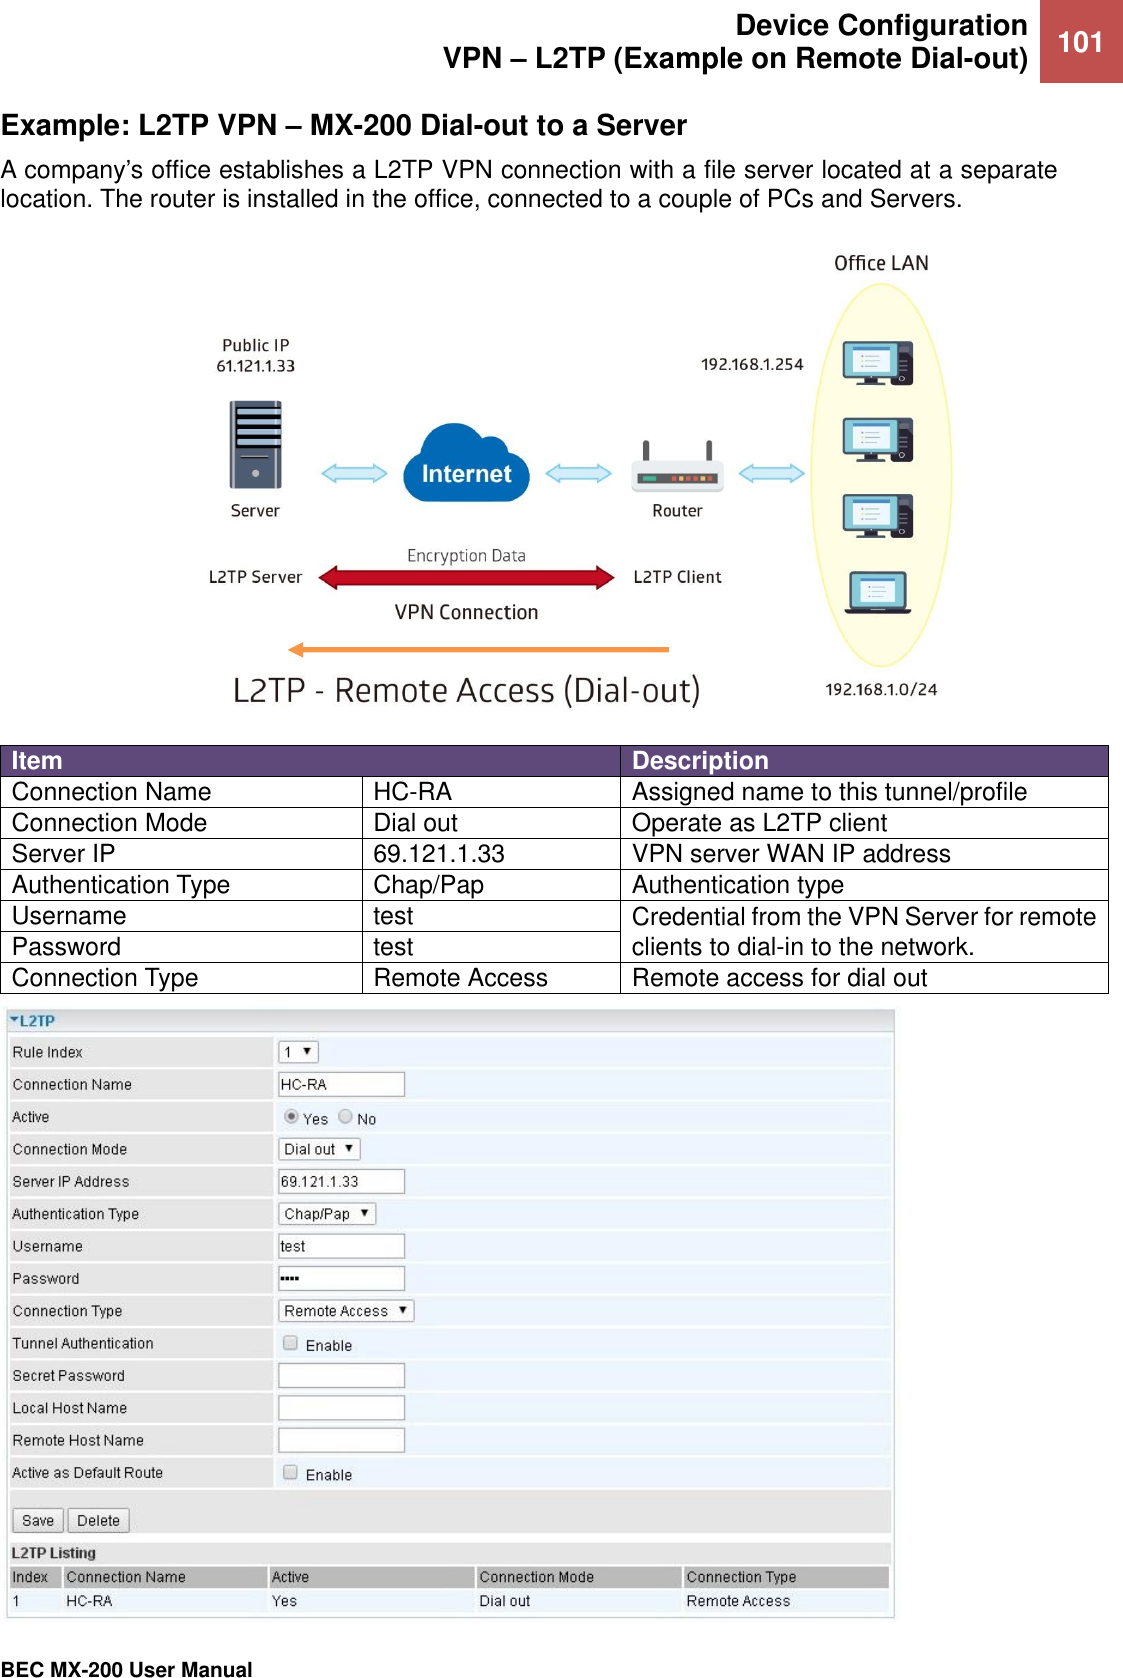  Device Configuration VPN – L2TP (Example on Remote Dial-out) 101   BEC MX-200 User Manual  Example: L2TP VPN – MX-200 Dial-out to a Server  A company’s office establishes a L2TP VPN connection with a file server located at a separate location. The router is installed in the office, connected to a couple of PCs and Servers.  Item Description Connection Name HC-RA Assigned name to this tunnel/profile Connection Mode Dial out Operate as L2TP client Server IP 69.121.1.33 VPN server WAN IP address Authentication Type Chap/Pap Authentication type Username test Credential from the VPN Server for remote clients to dial-in to the network.   Password test Connection Type Remote Access Remote access for dial out 